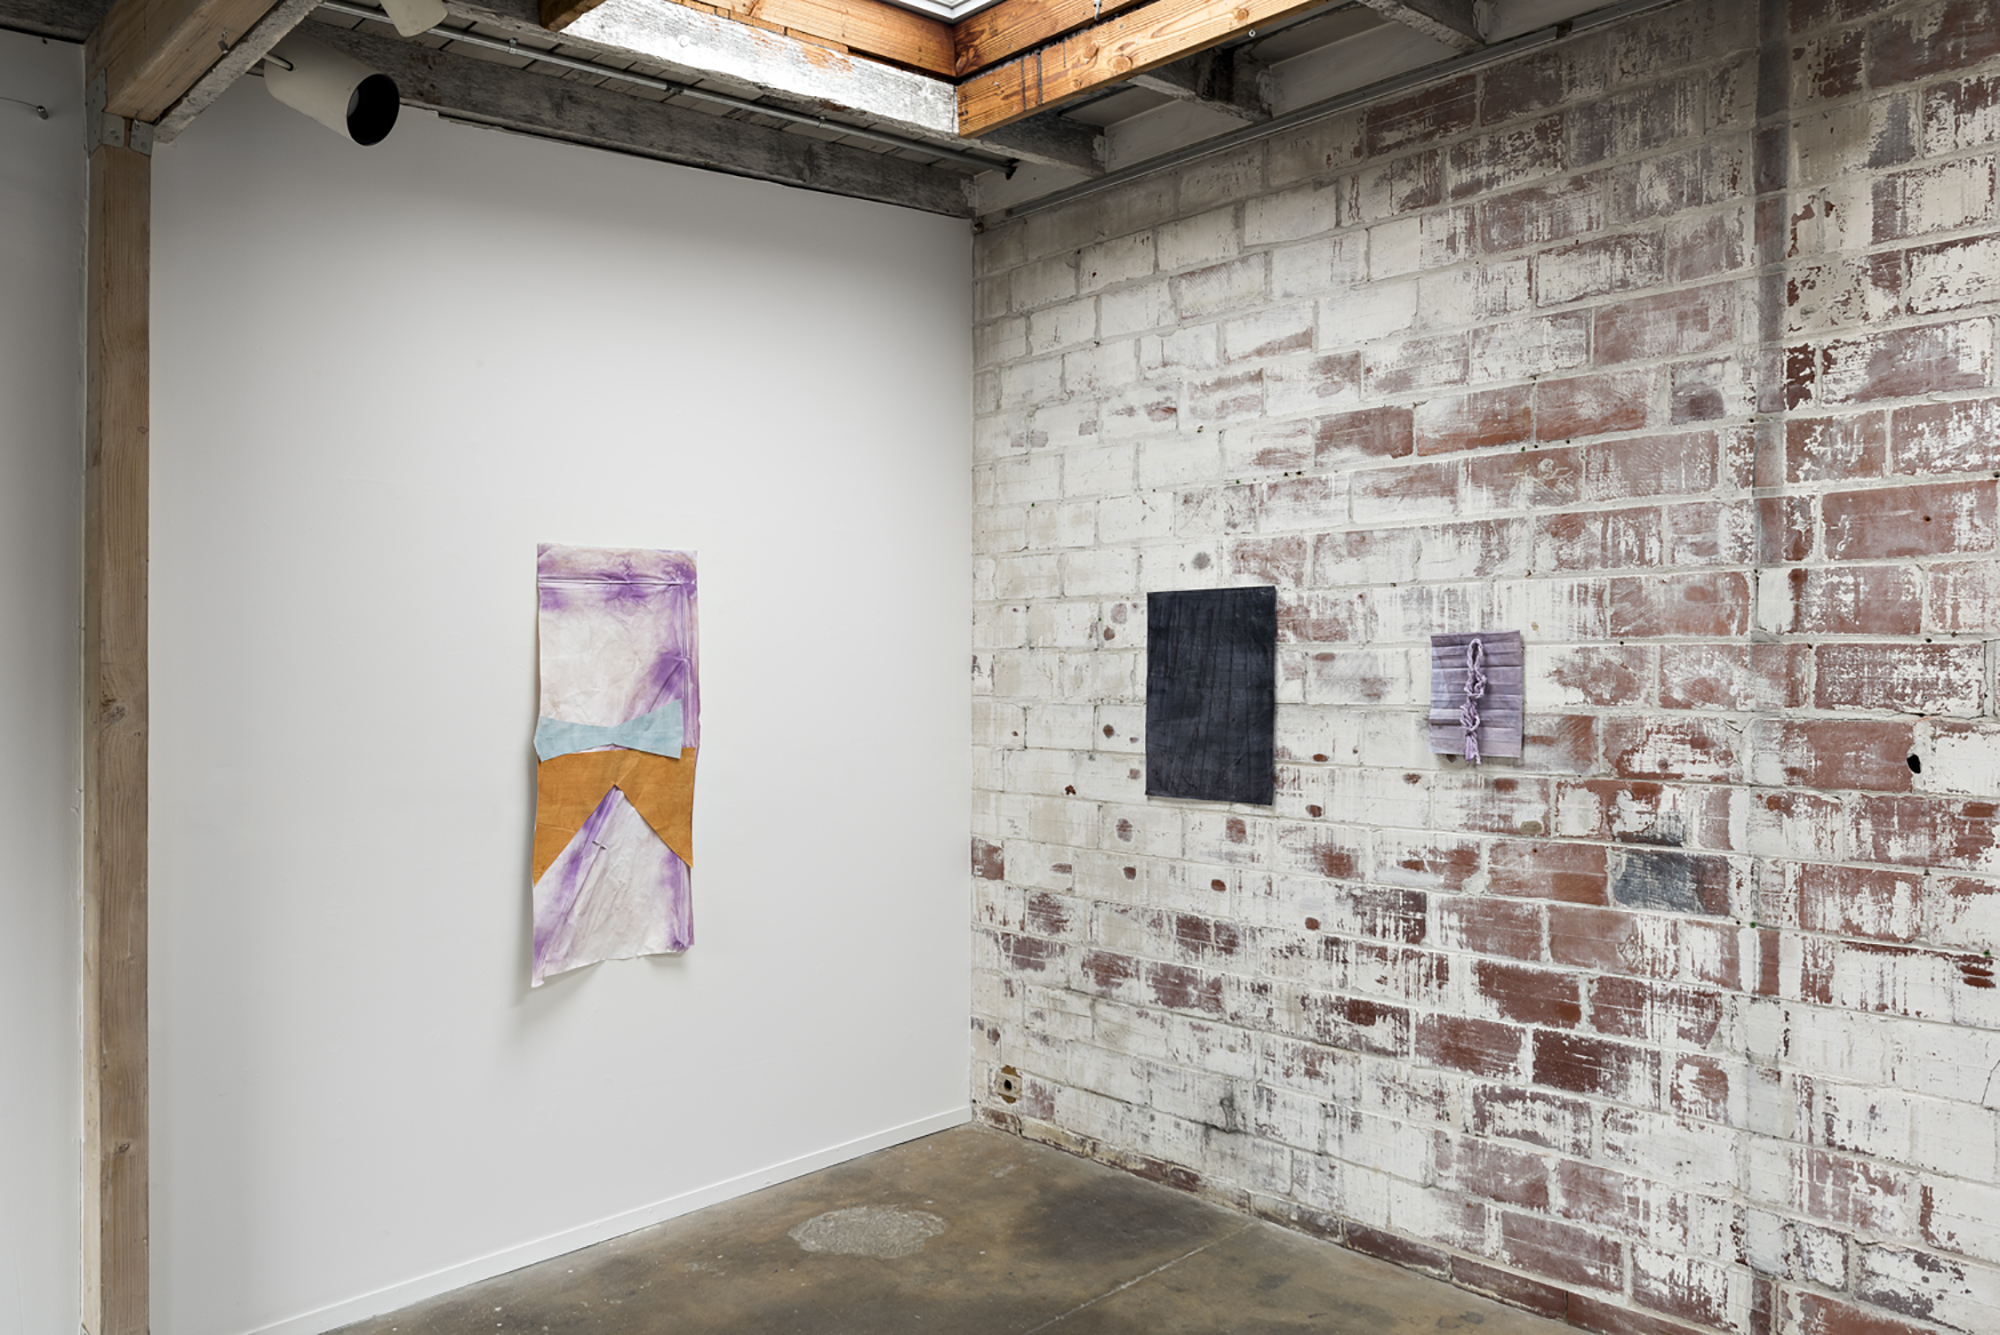   Other Echoes  at Interface Gallery, 2016. 